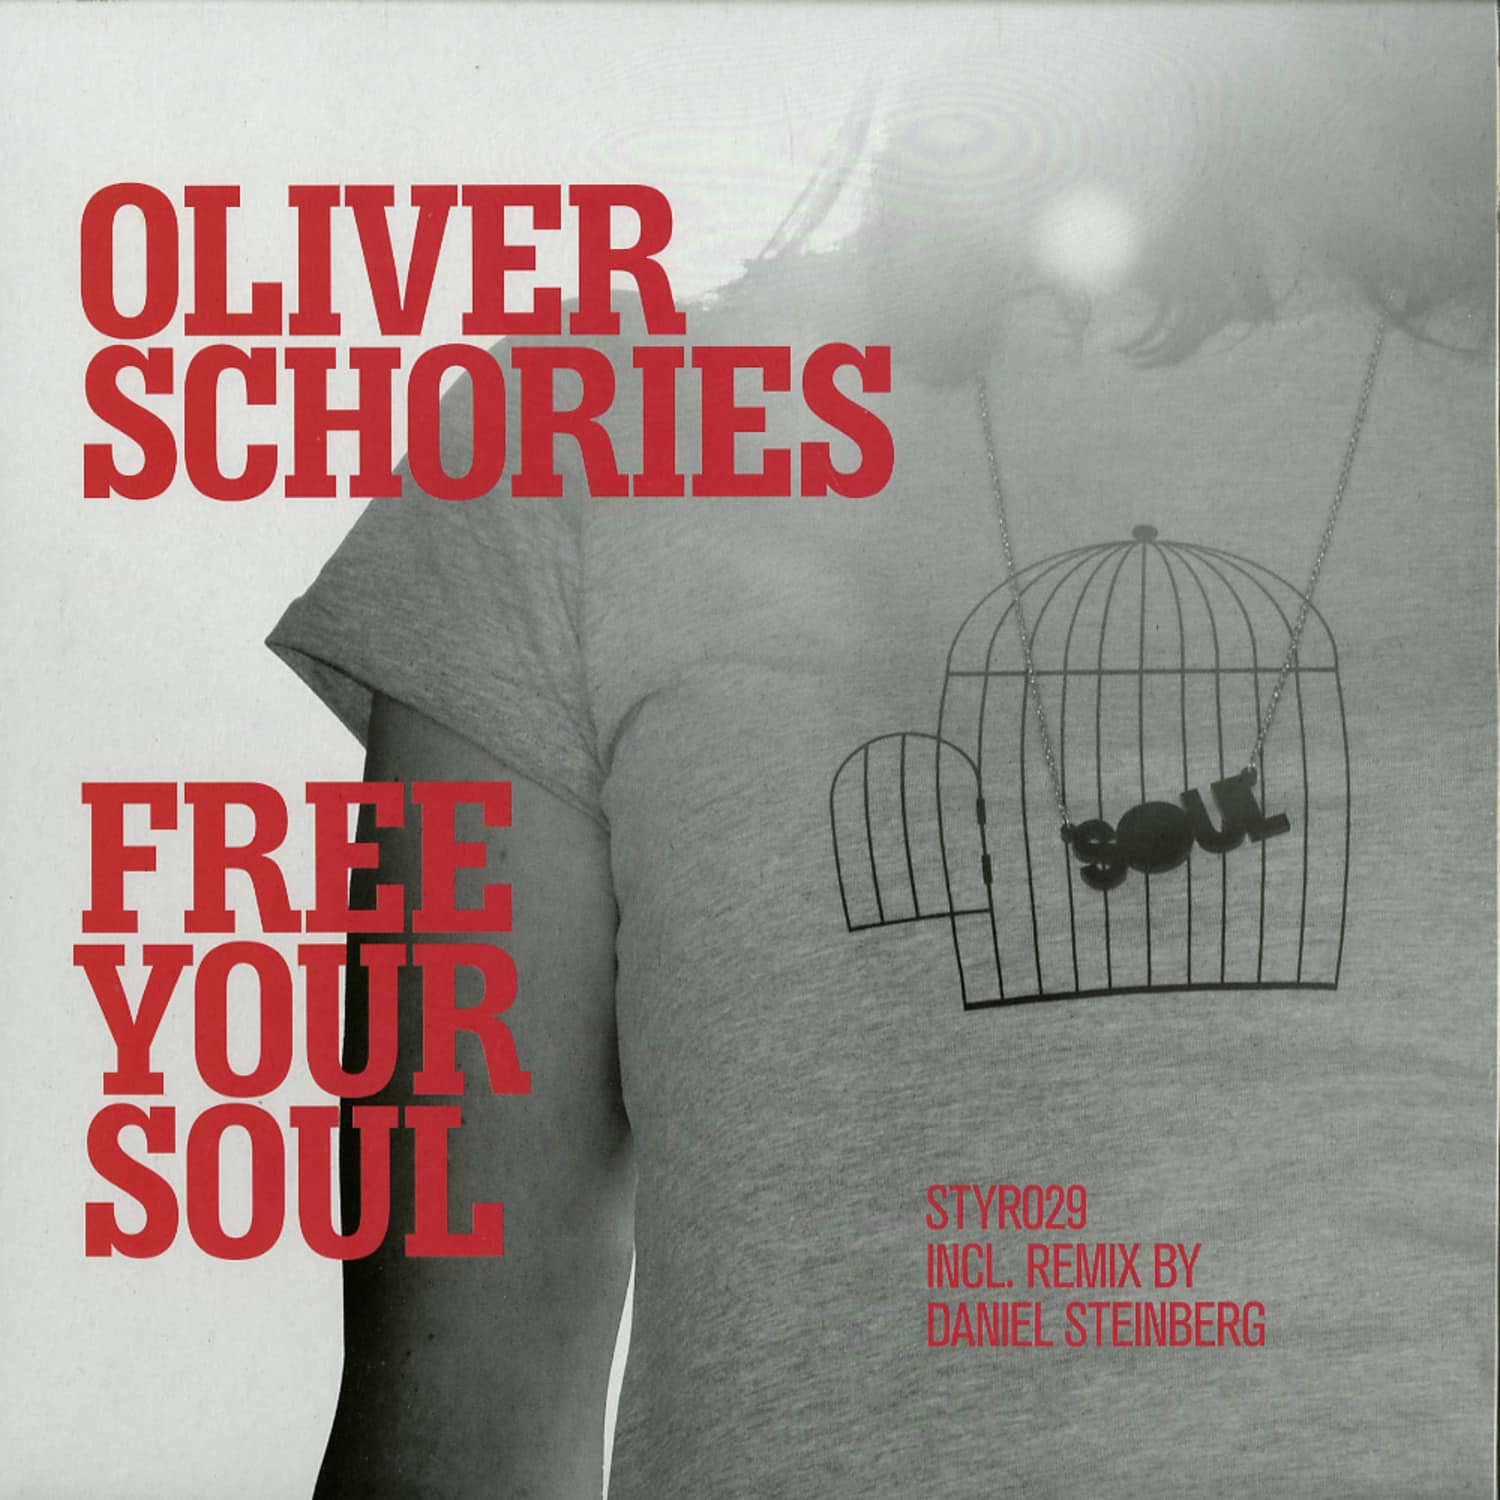 Oliver Schories - FREE YOUR SOUL 